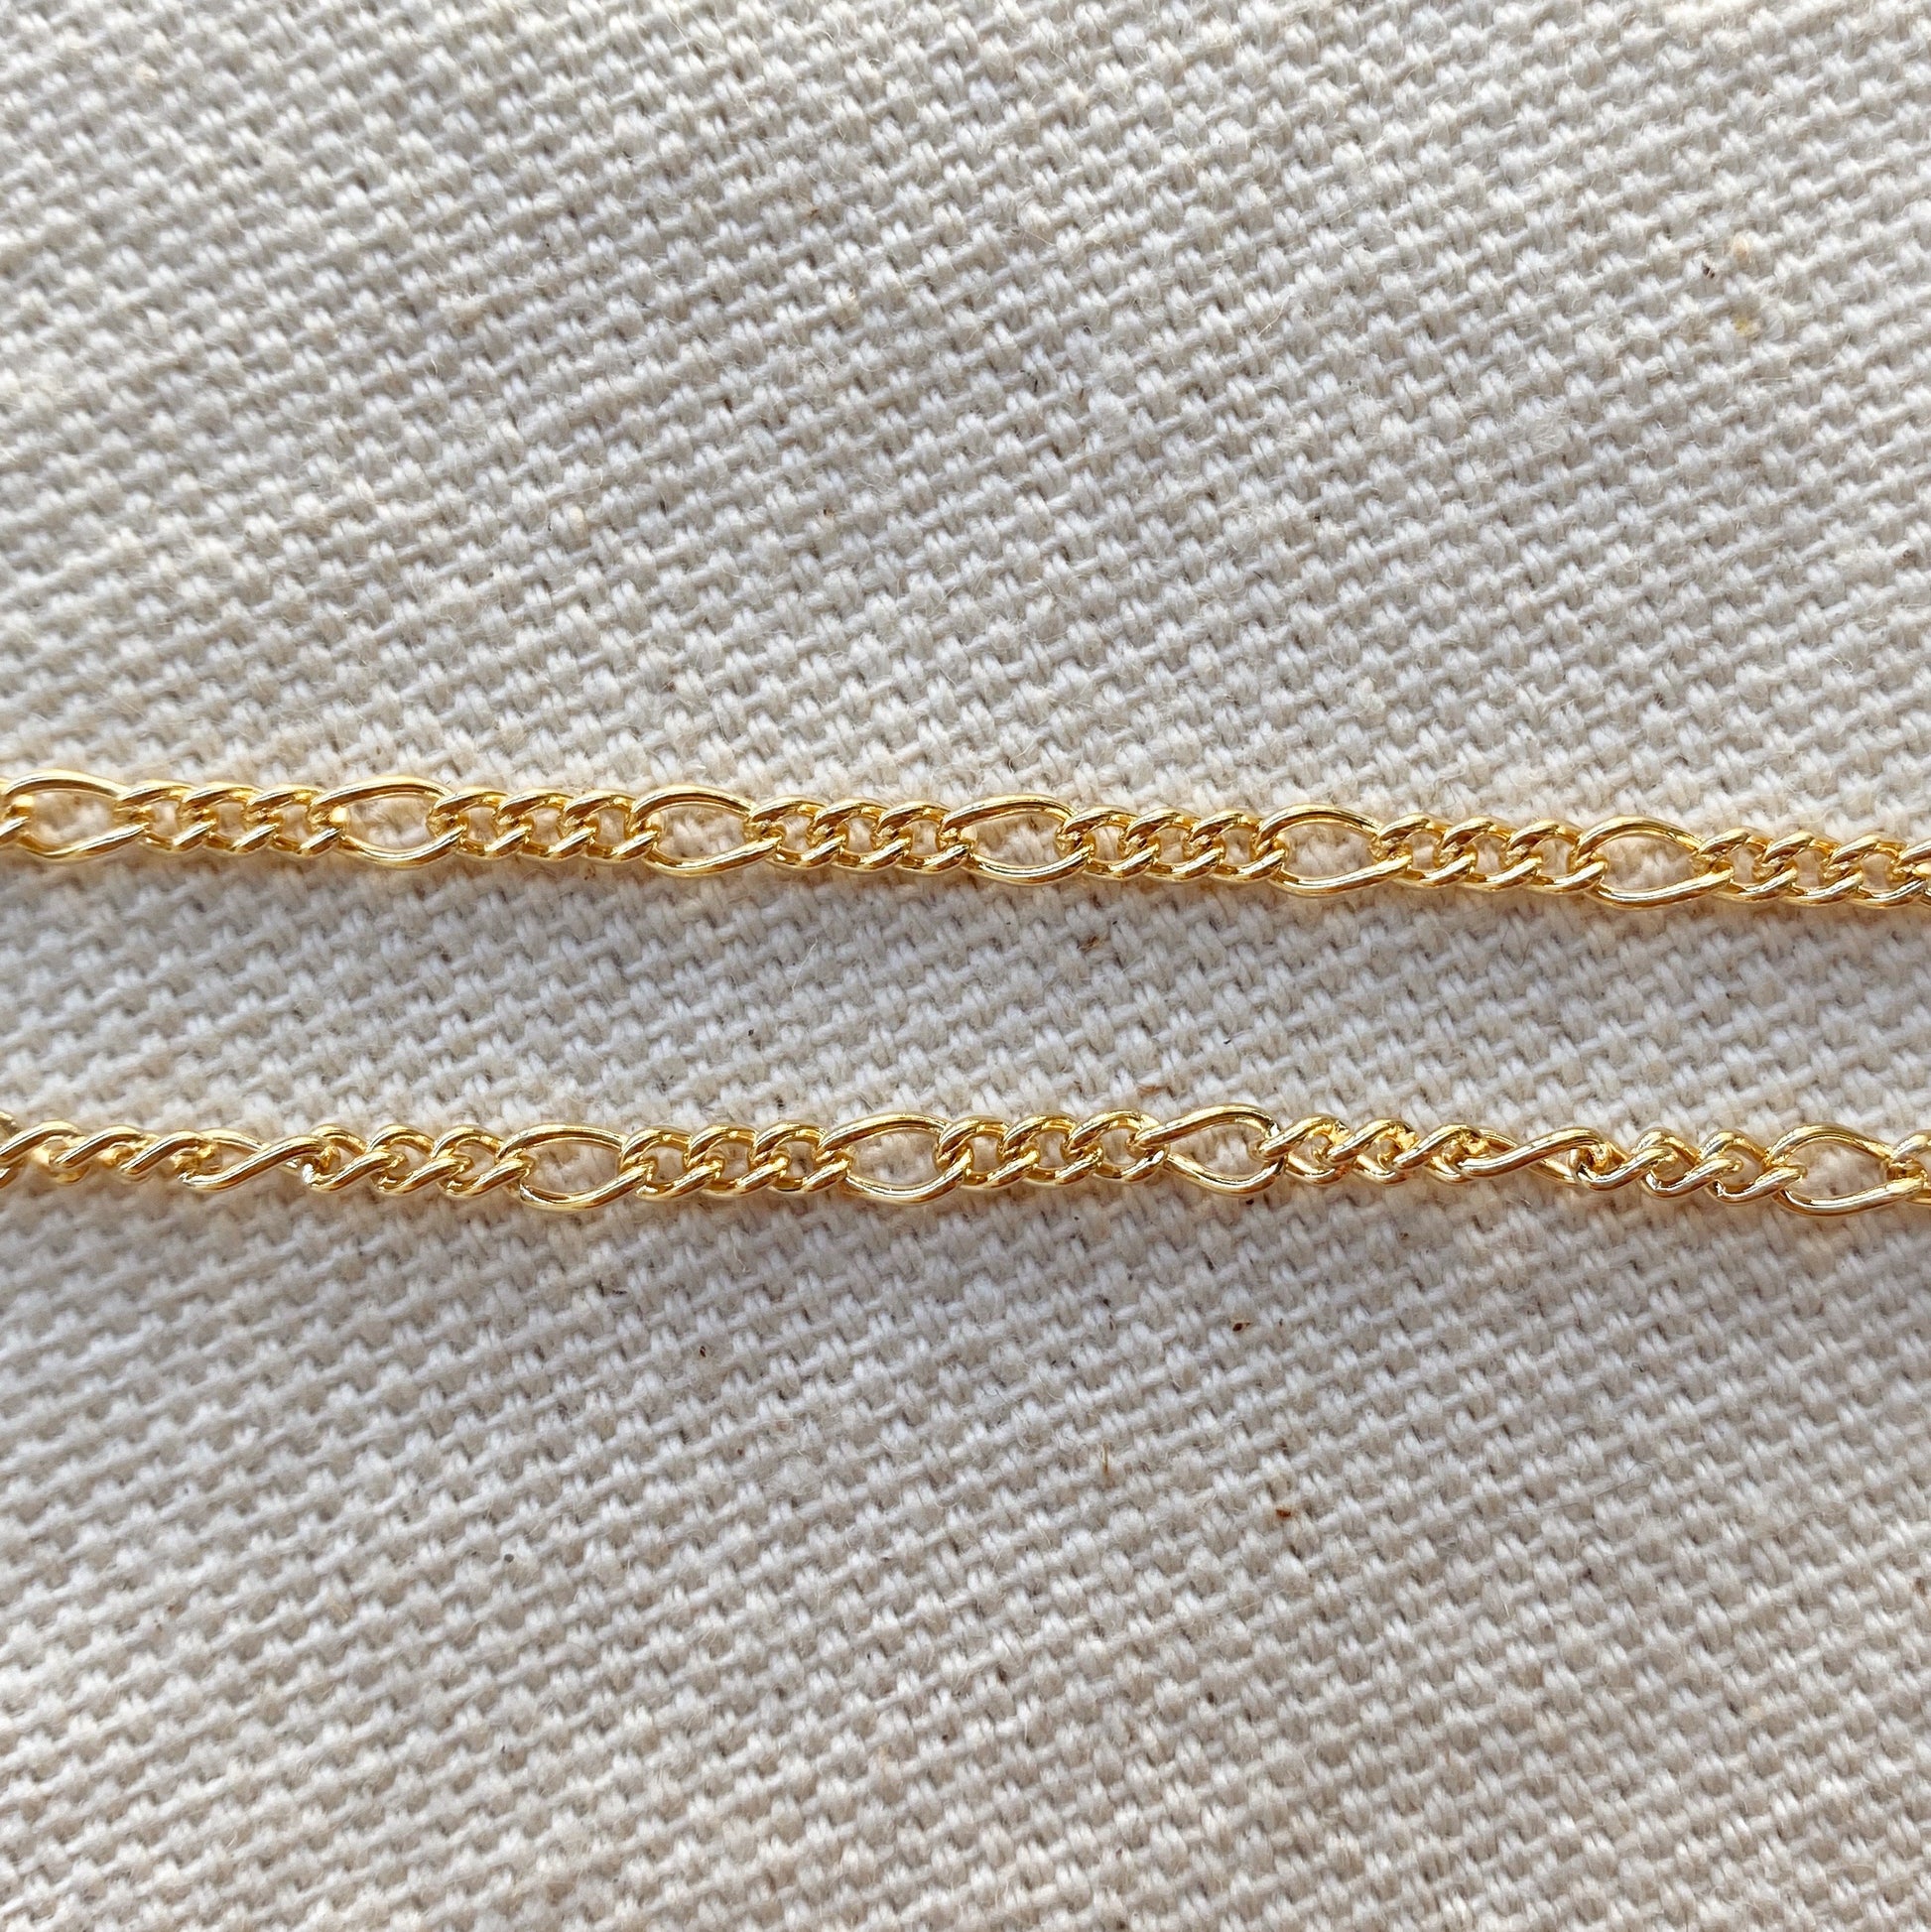 GoldFi 18k Gold Filled 2mm Rounded 3x1 Figaro Chain